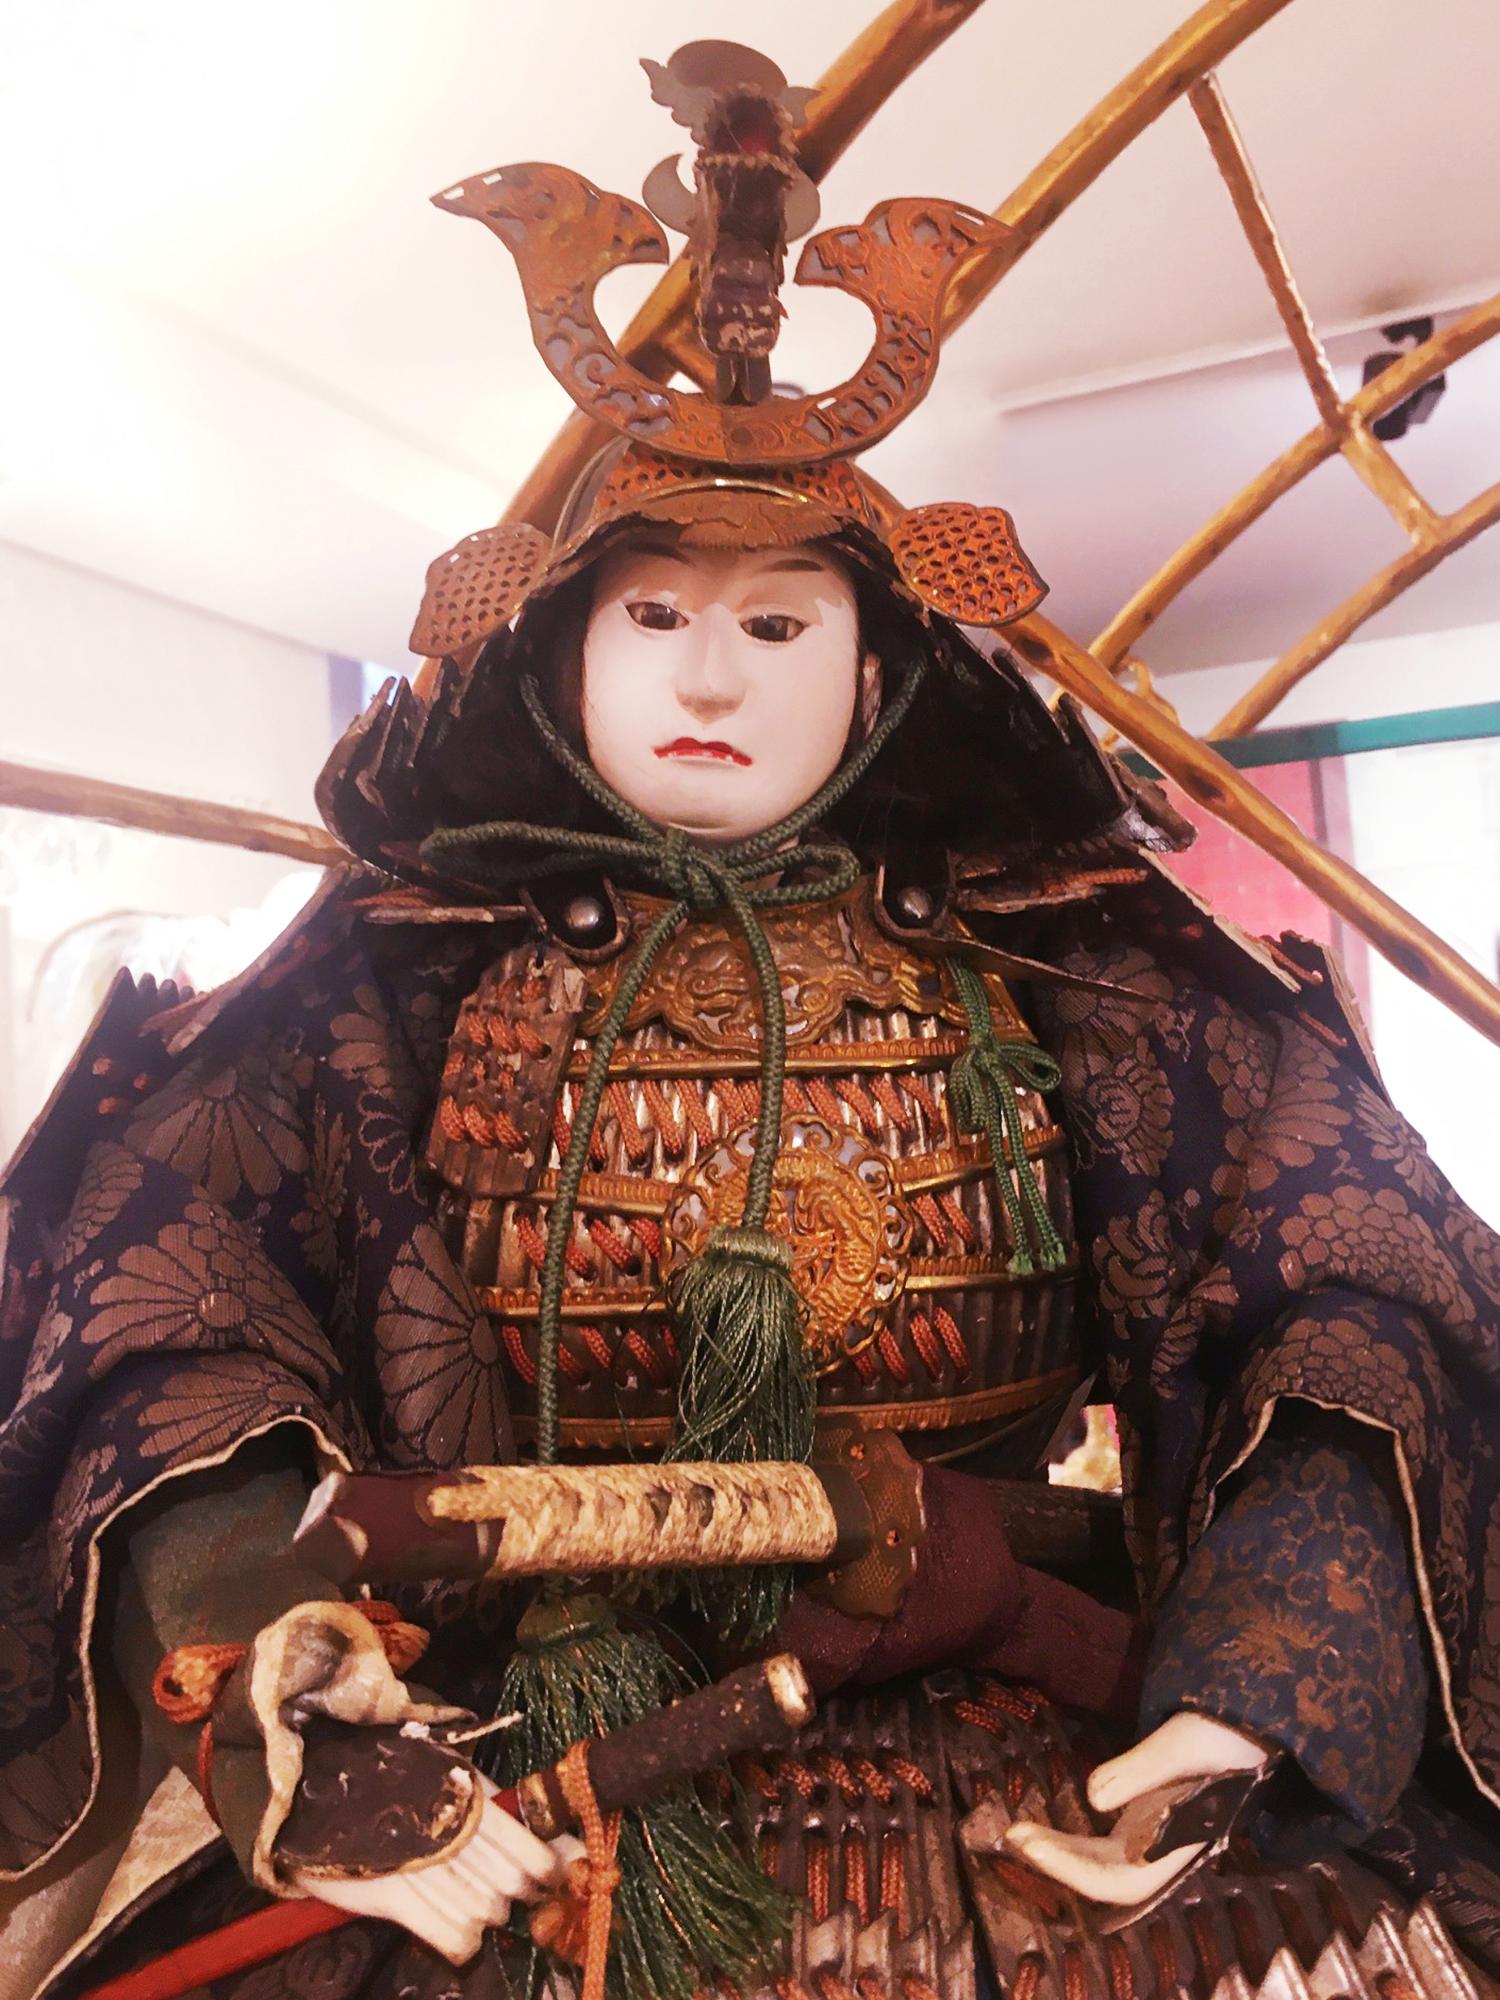 Sculpture Samuraï Puppet Musha Nyngyo A Set of 2 with structure
in wood, hand-carved wood, hand-painted wood, hand-lacquered 
wood, covered with hand-embroidered silk puppet garments. All
details are hand-carved, hand-painted in wood. Exceptional